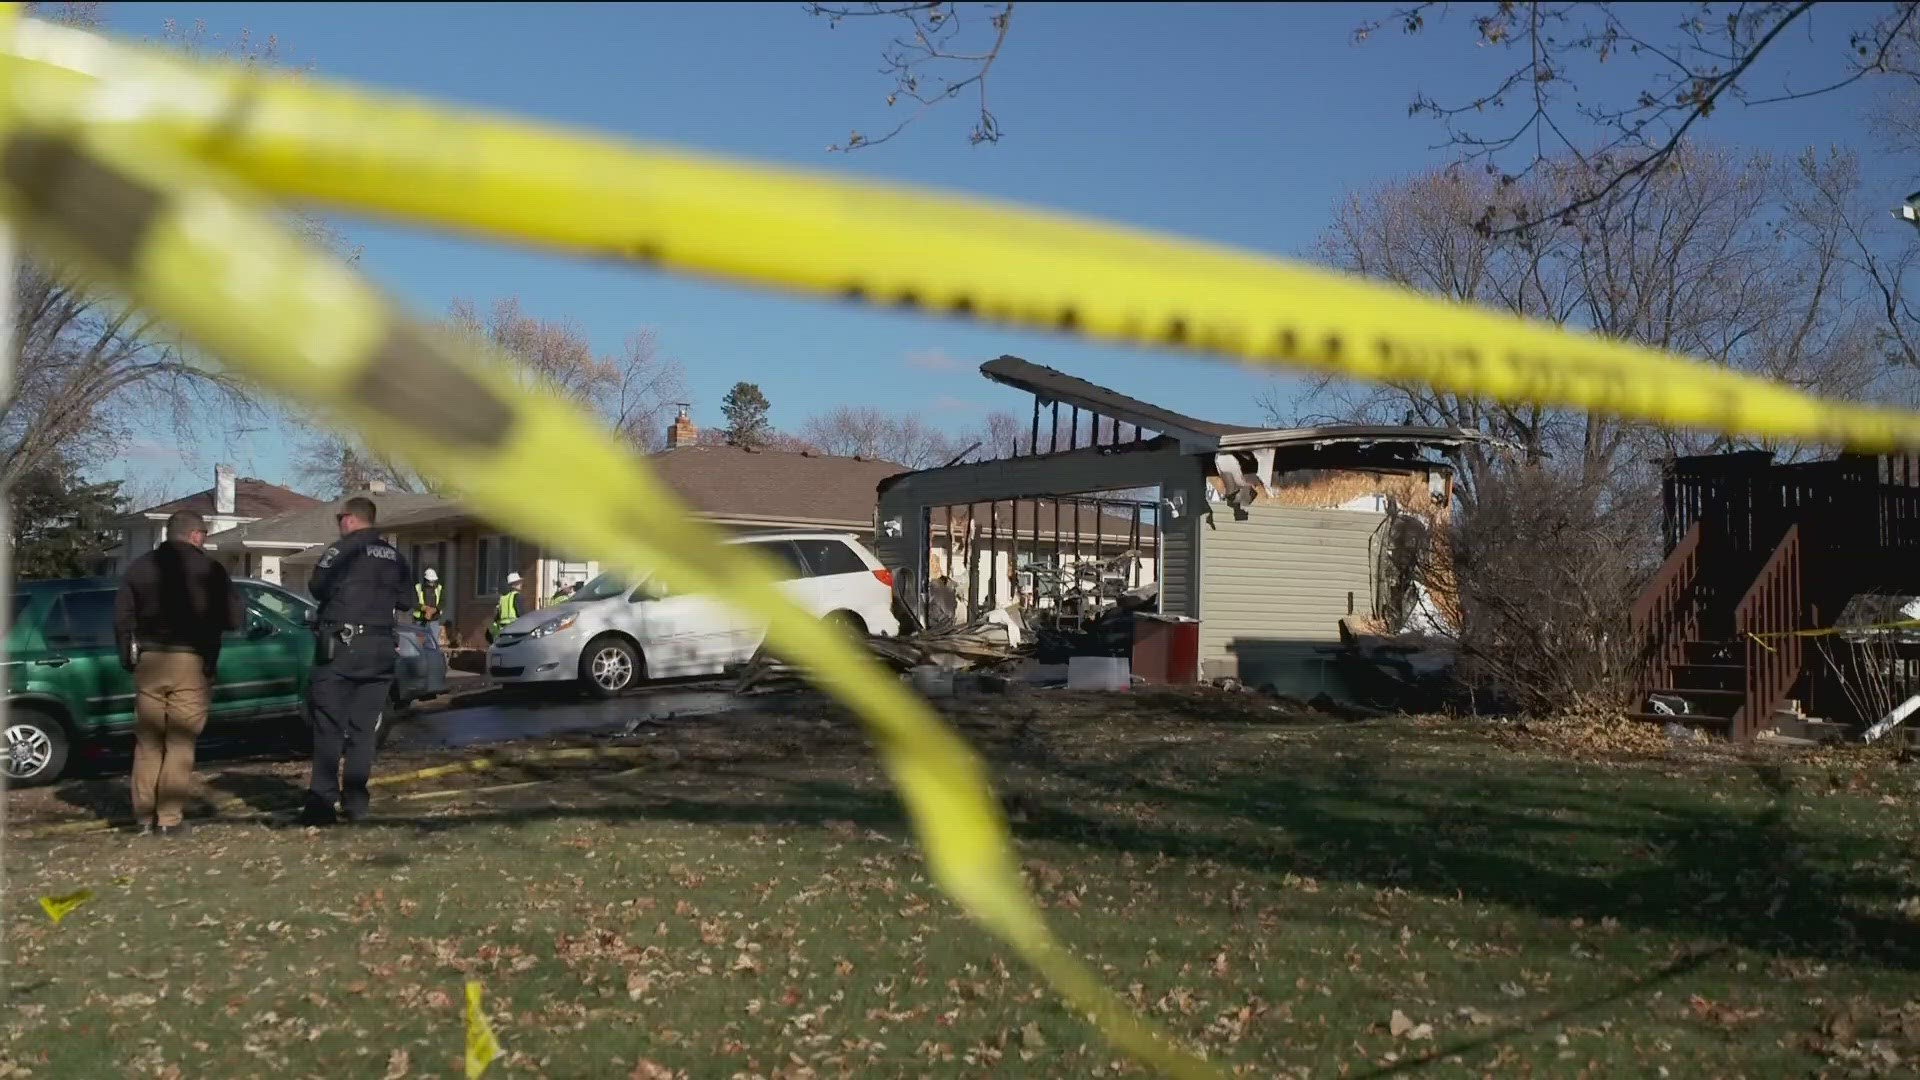 South Metro Fire Chief Mark Juelfs said the victim's body was found inside the garage, but that person's identity has not yet been made public.